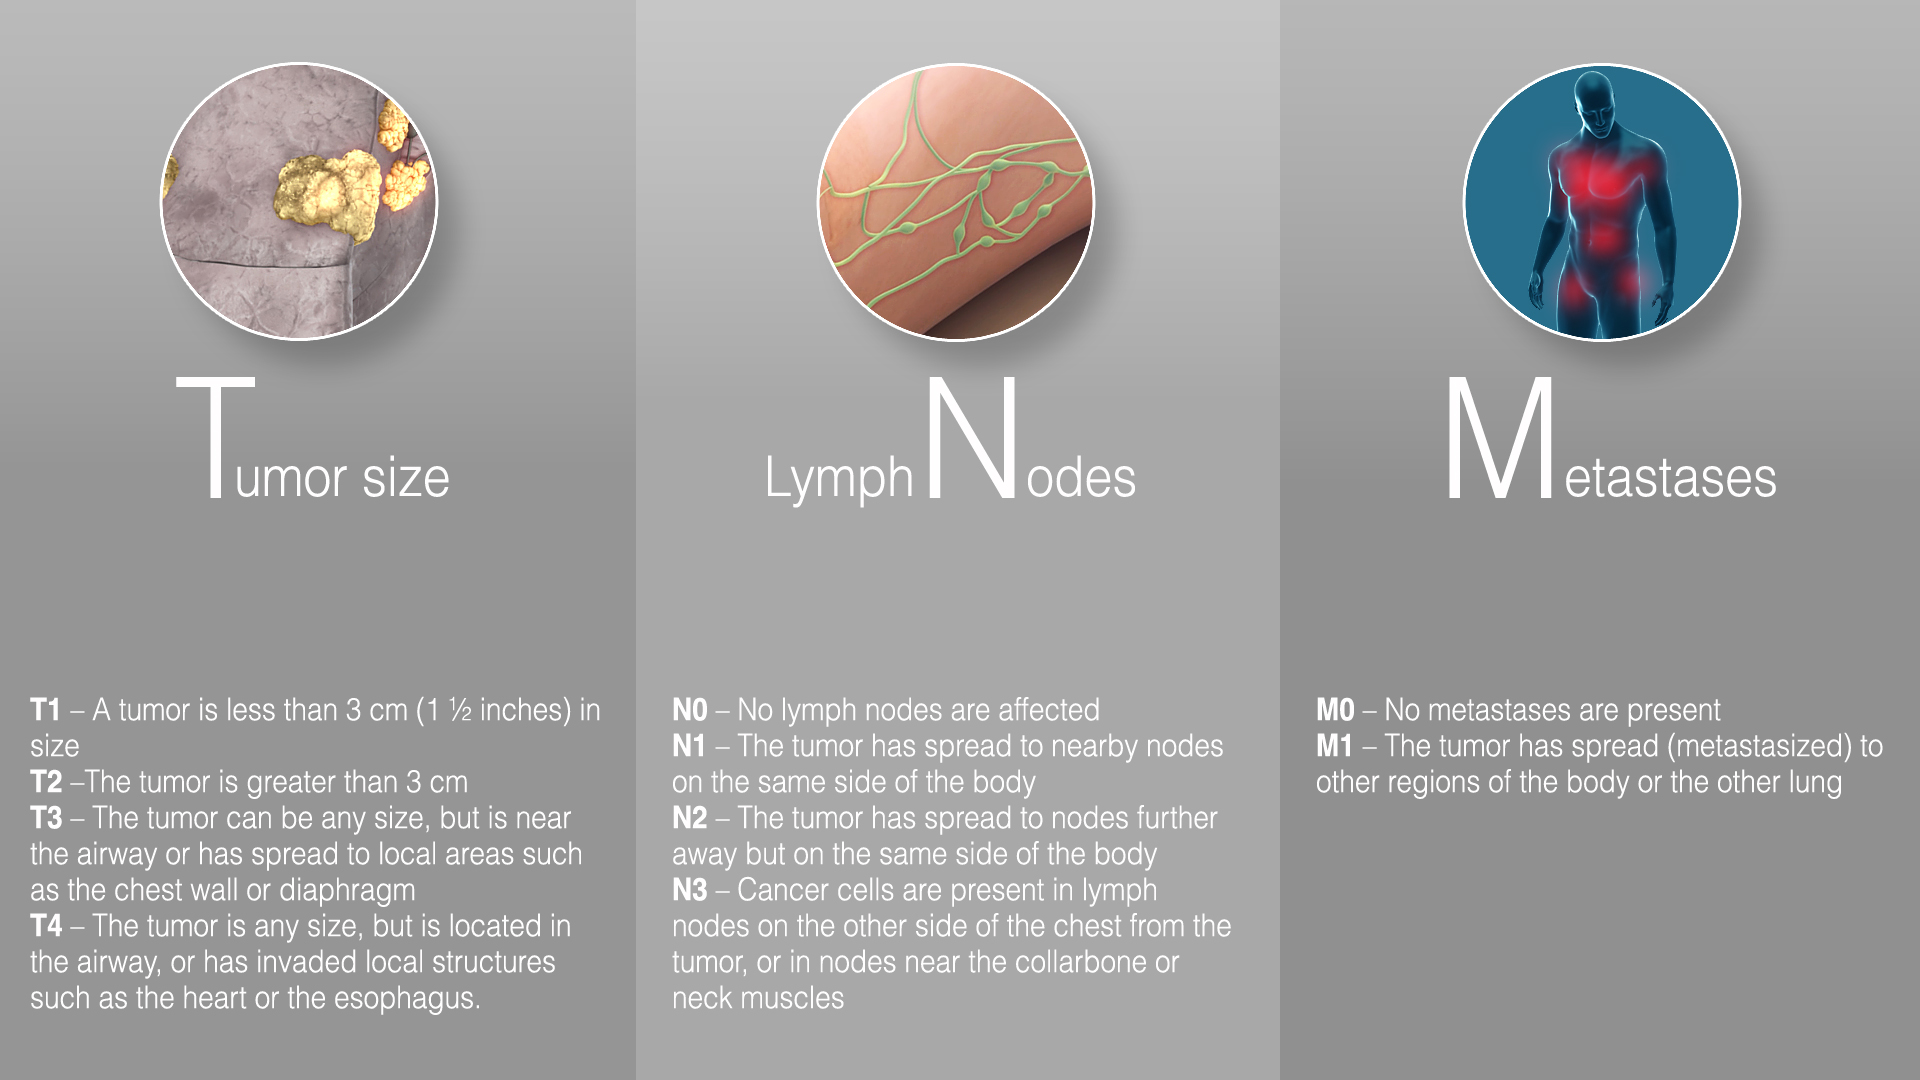 Breast Cancer Staging Chart Tnm